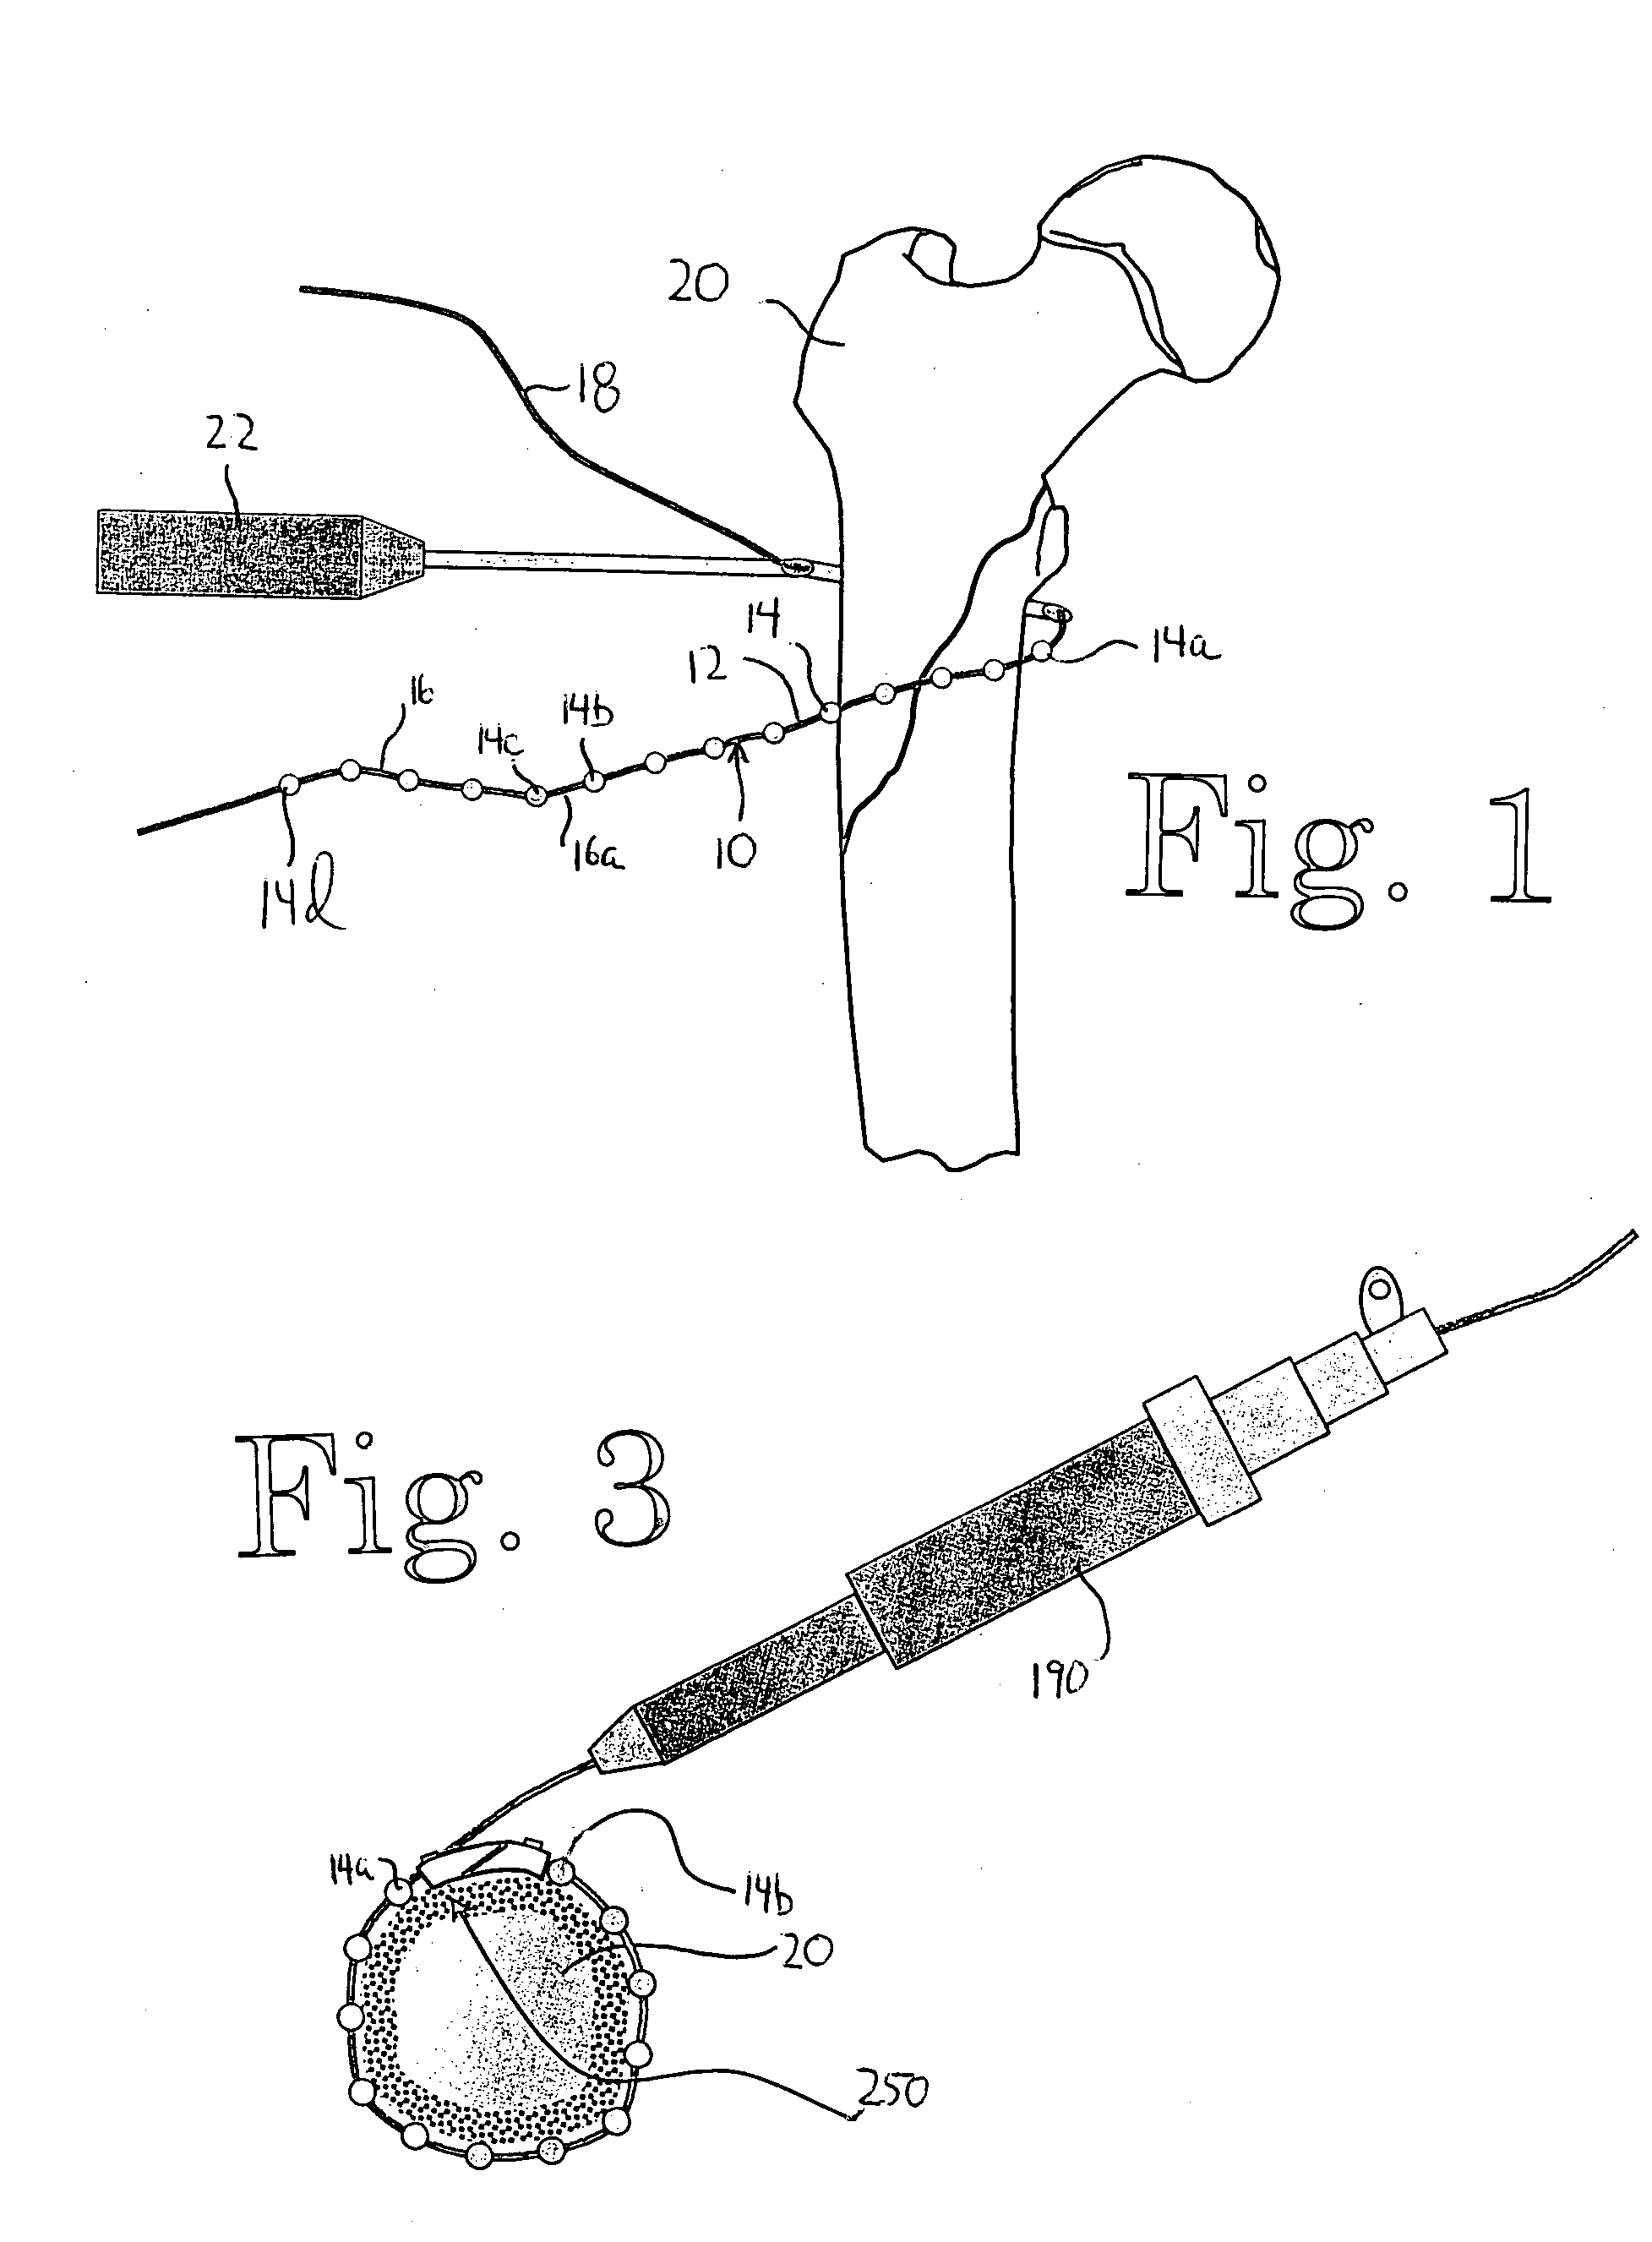 Surgical instrument, and related methods